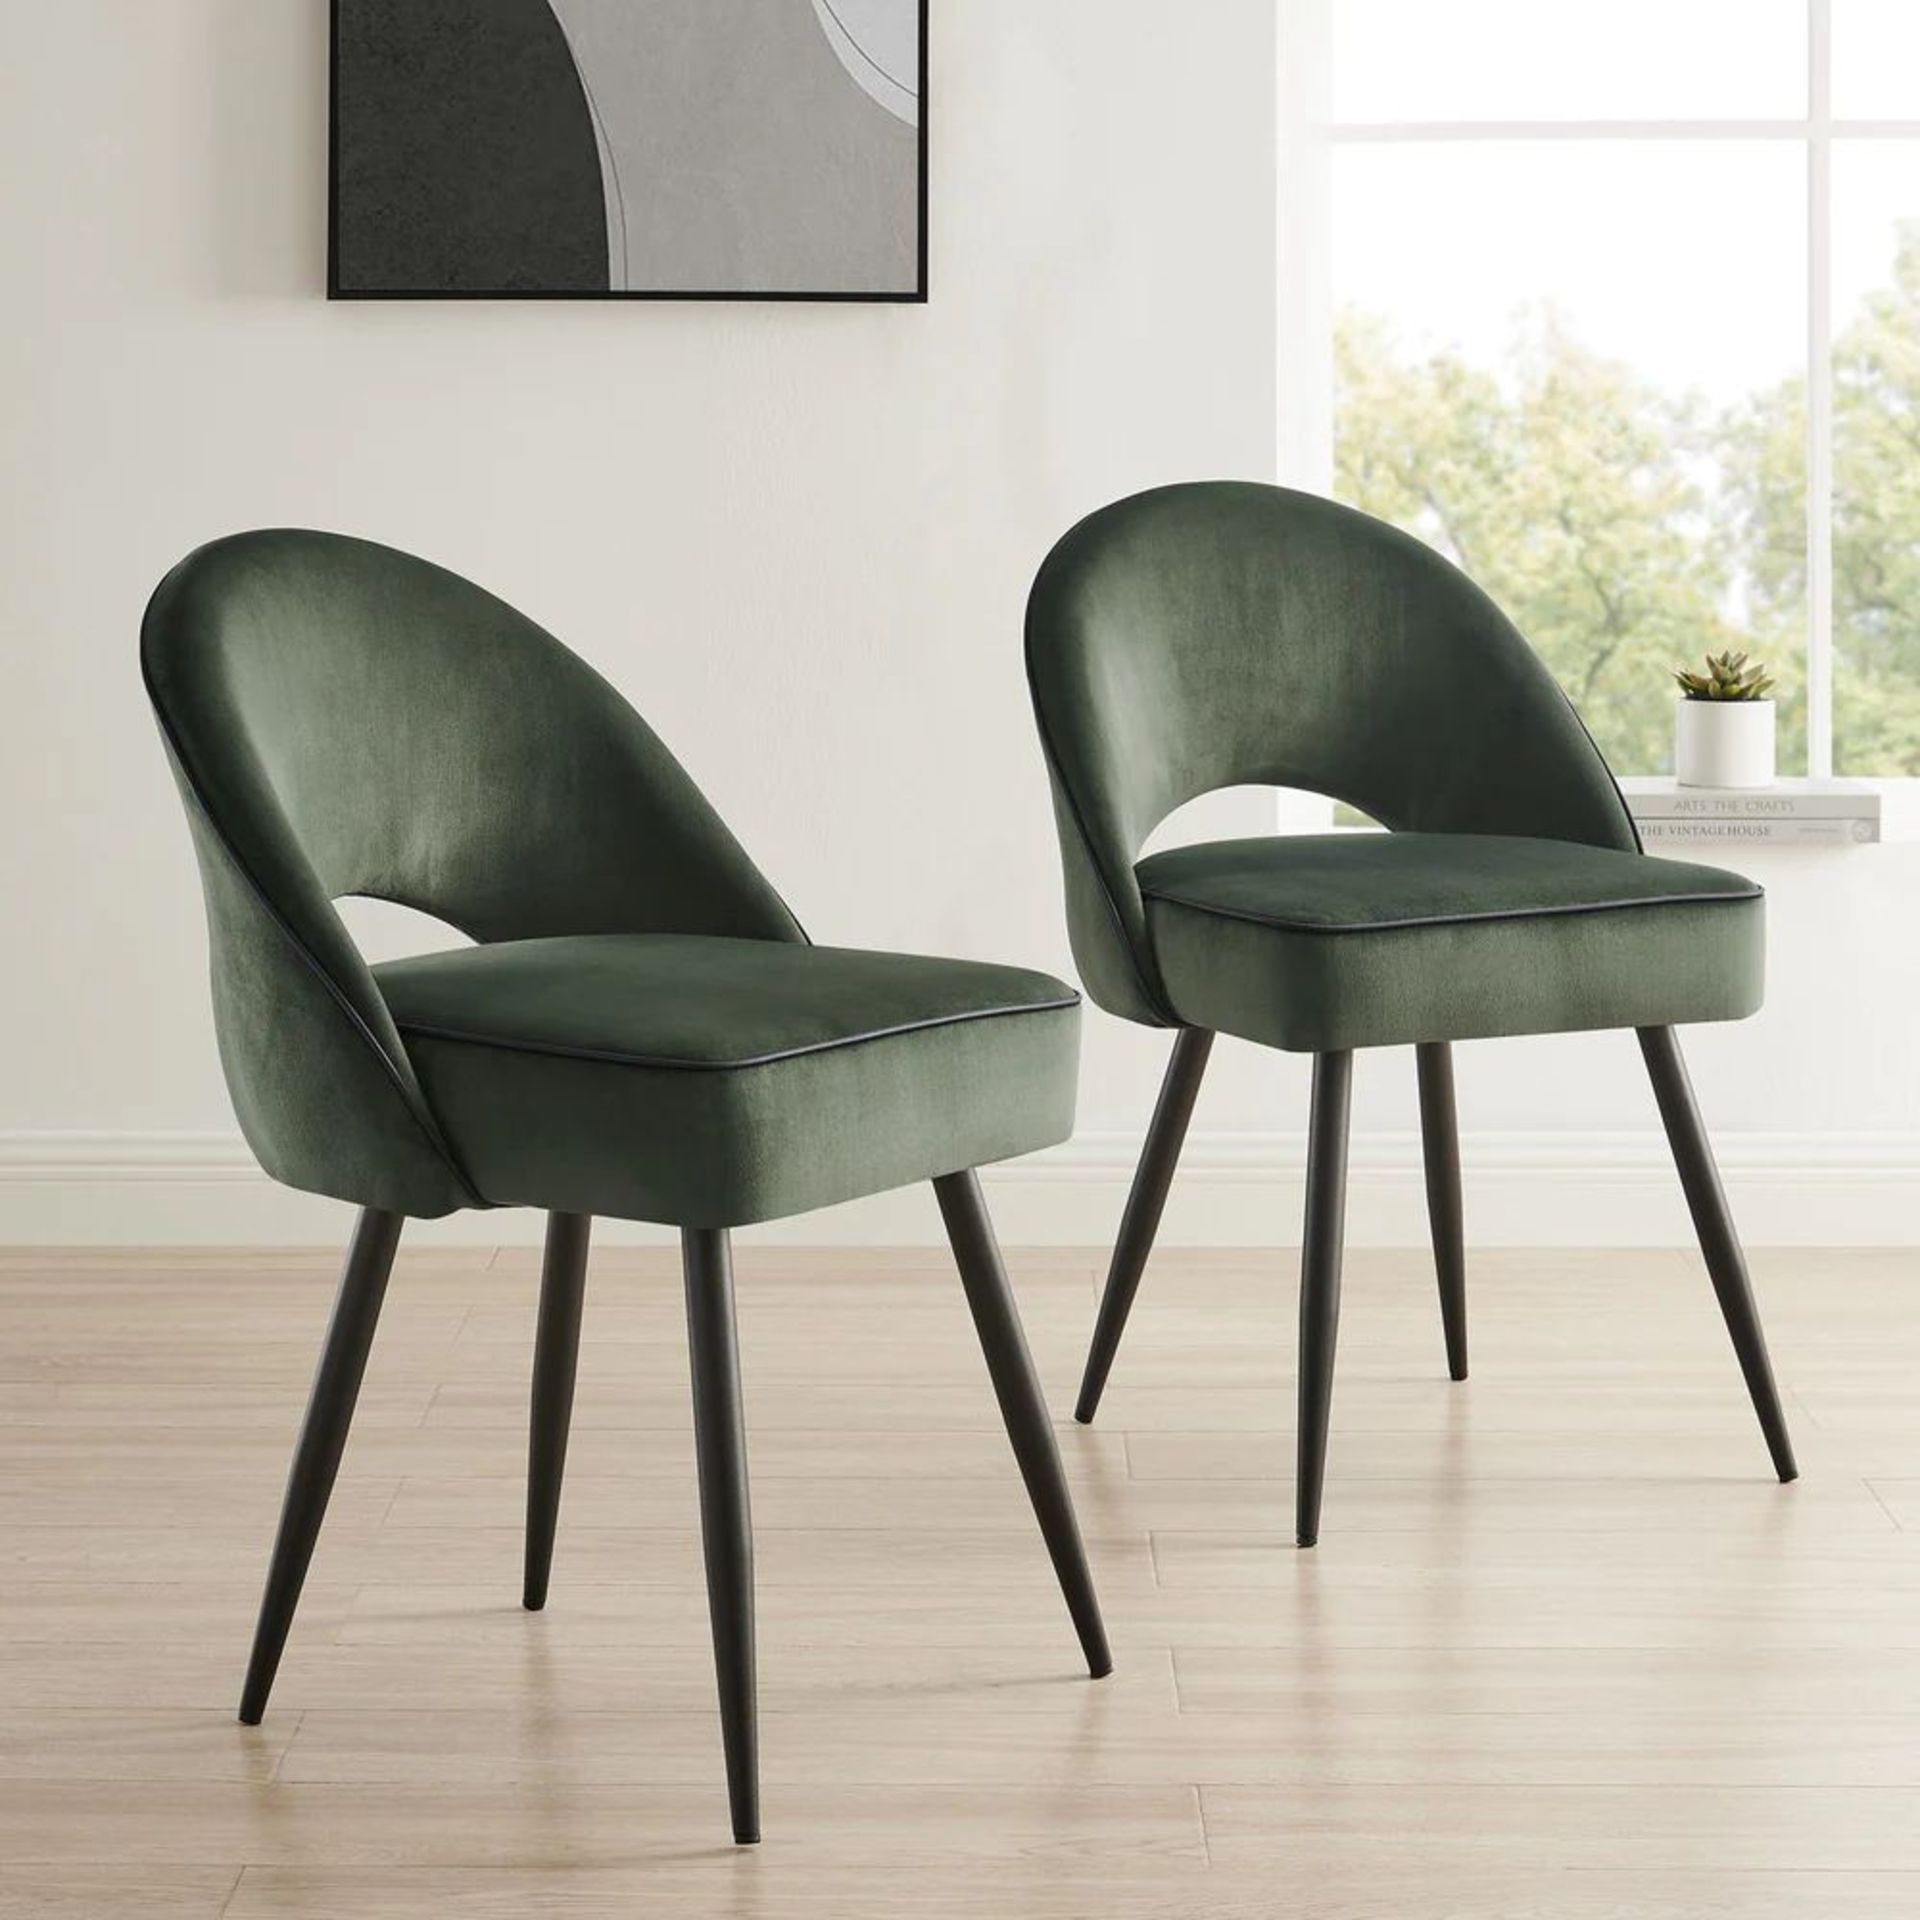 Oakley Set of 2 Dark Green Velvet Upholstered Dining Chairs with Contrast Piping. - ER29. RRP £289. - Image 3 of 4